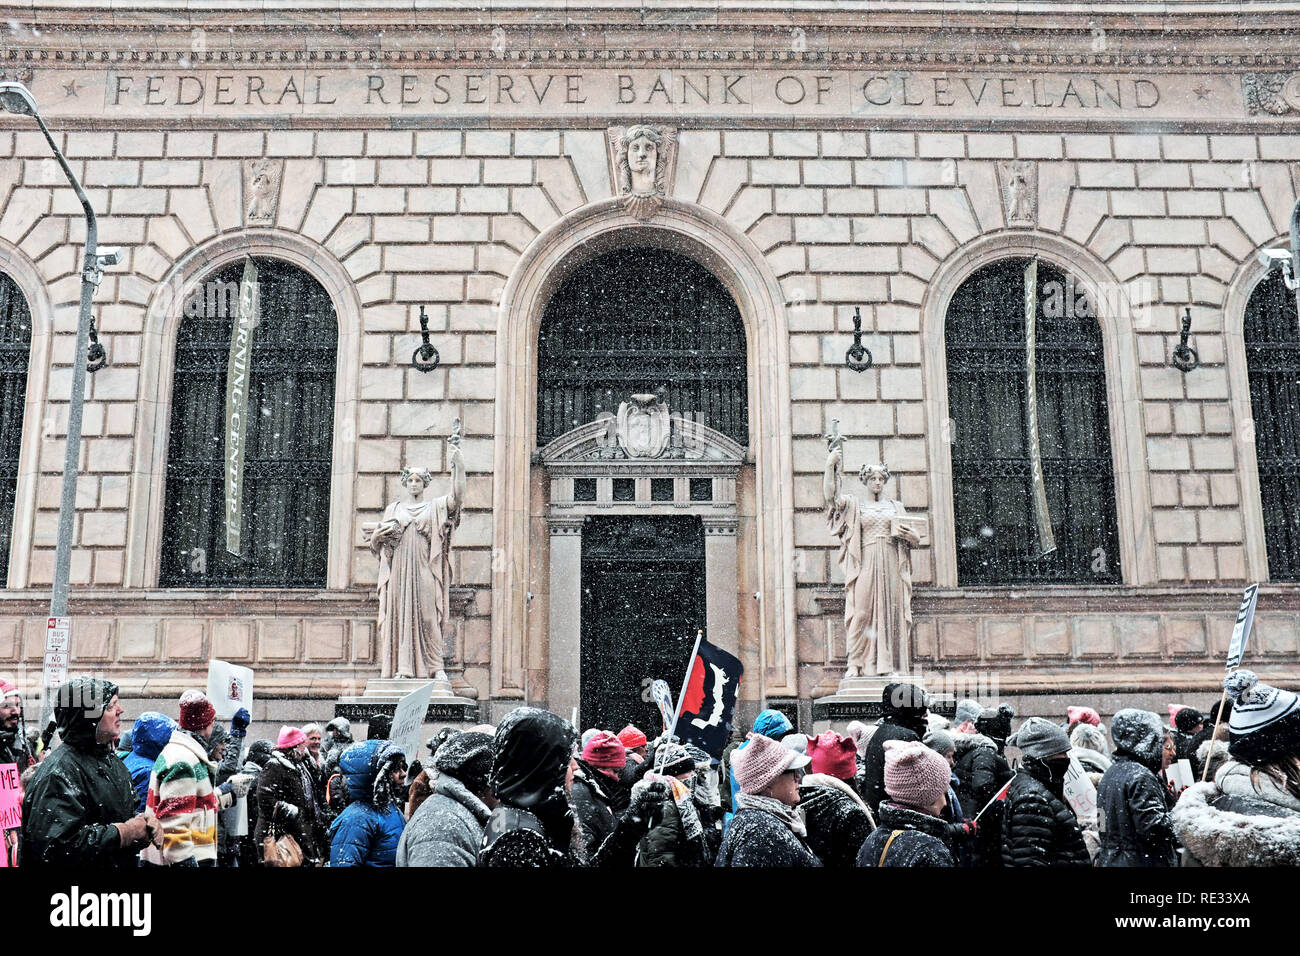 Cleveland, Ohio, USA, 19th January, 2019.  Winter storm Harper, the first major winter storm of the season starts to blanket participants in the 2019 Women's March in downtown Cleveland, Ohio, USA as they pass the Federal Reserve Bank of Cleveland.  Credit: Mark Kanning/Alamy Live News. Stock Photo